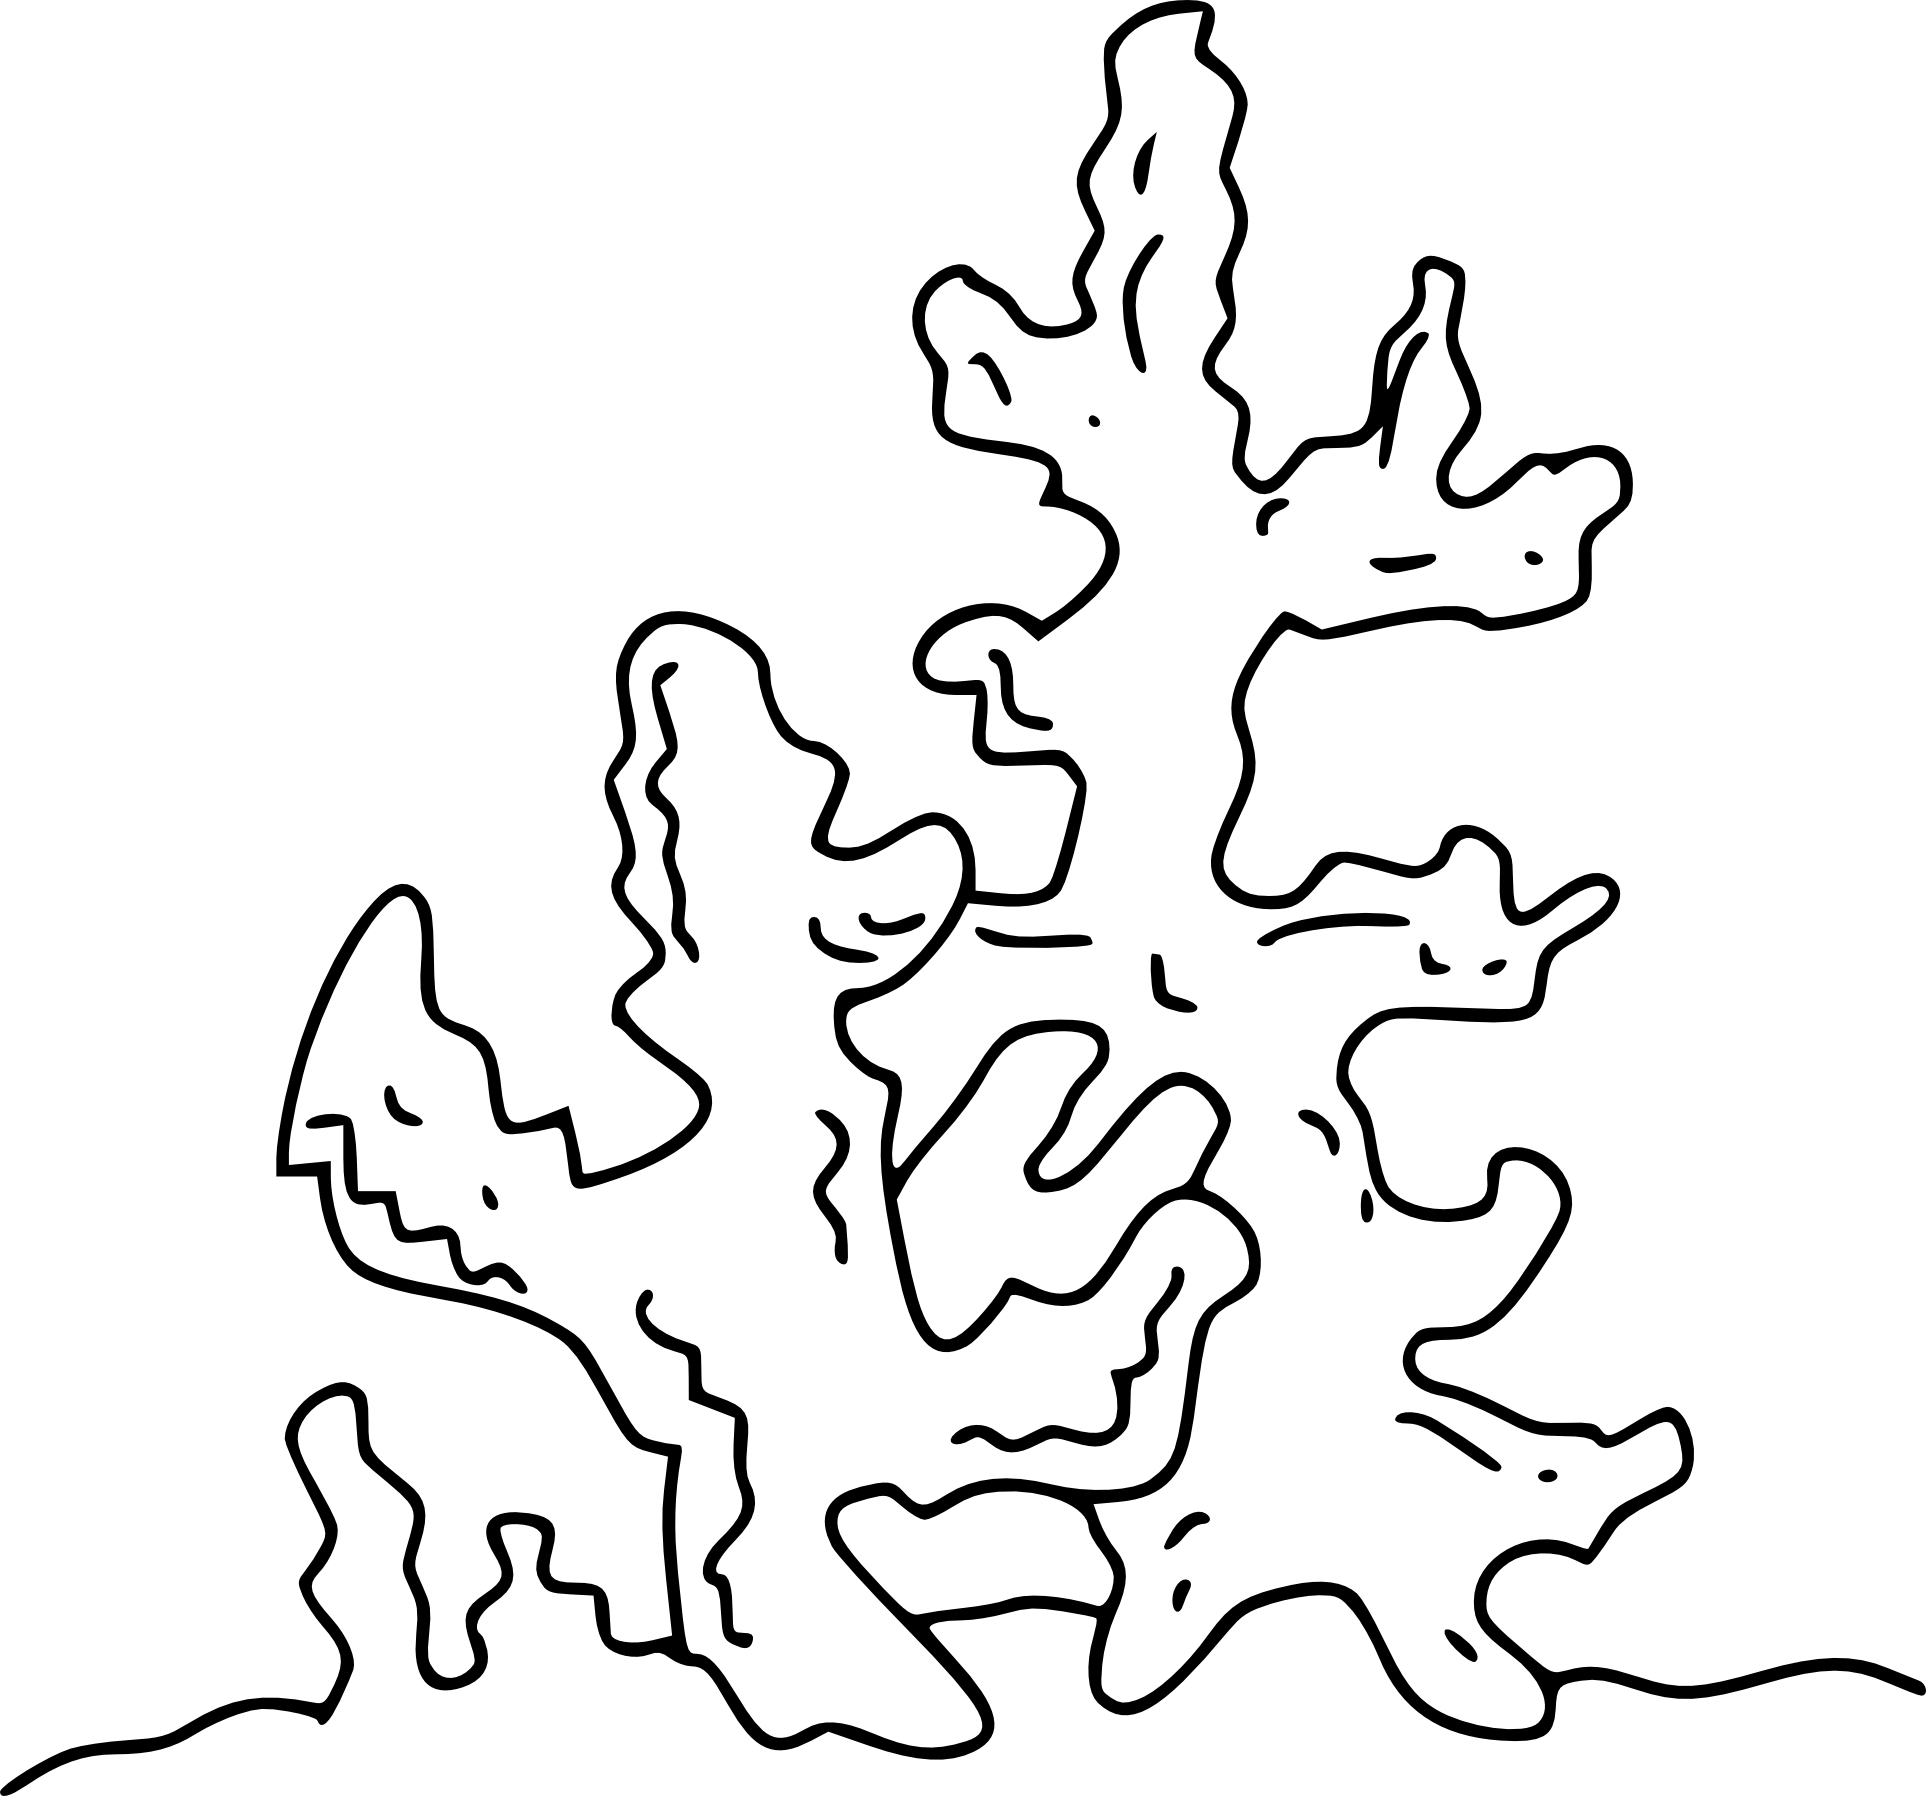 Seaweed drawing and coloring page